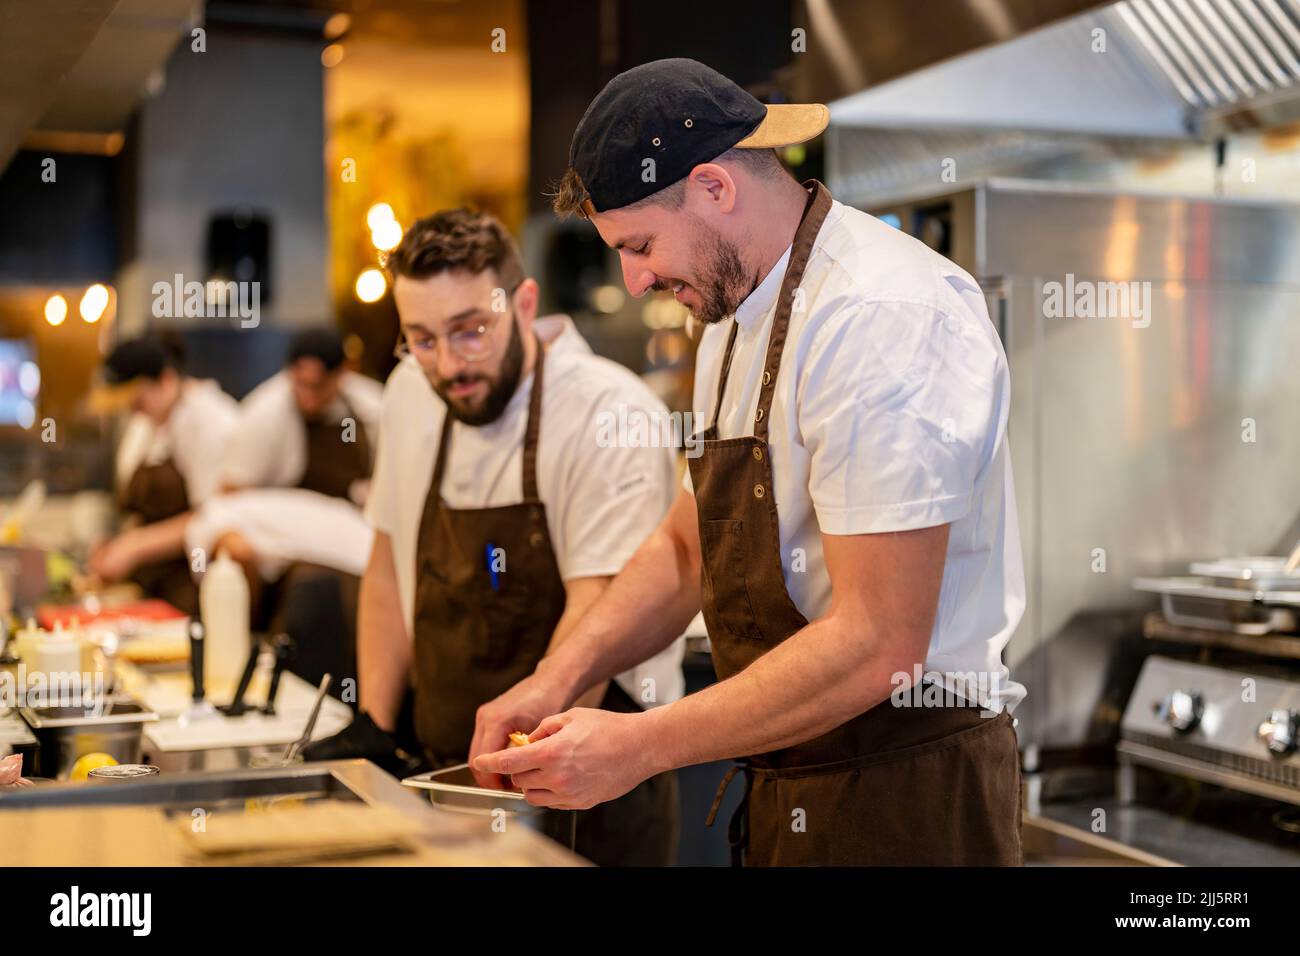 Chef preparing food standing by colleague at restaurant kitchen Stock Photo